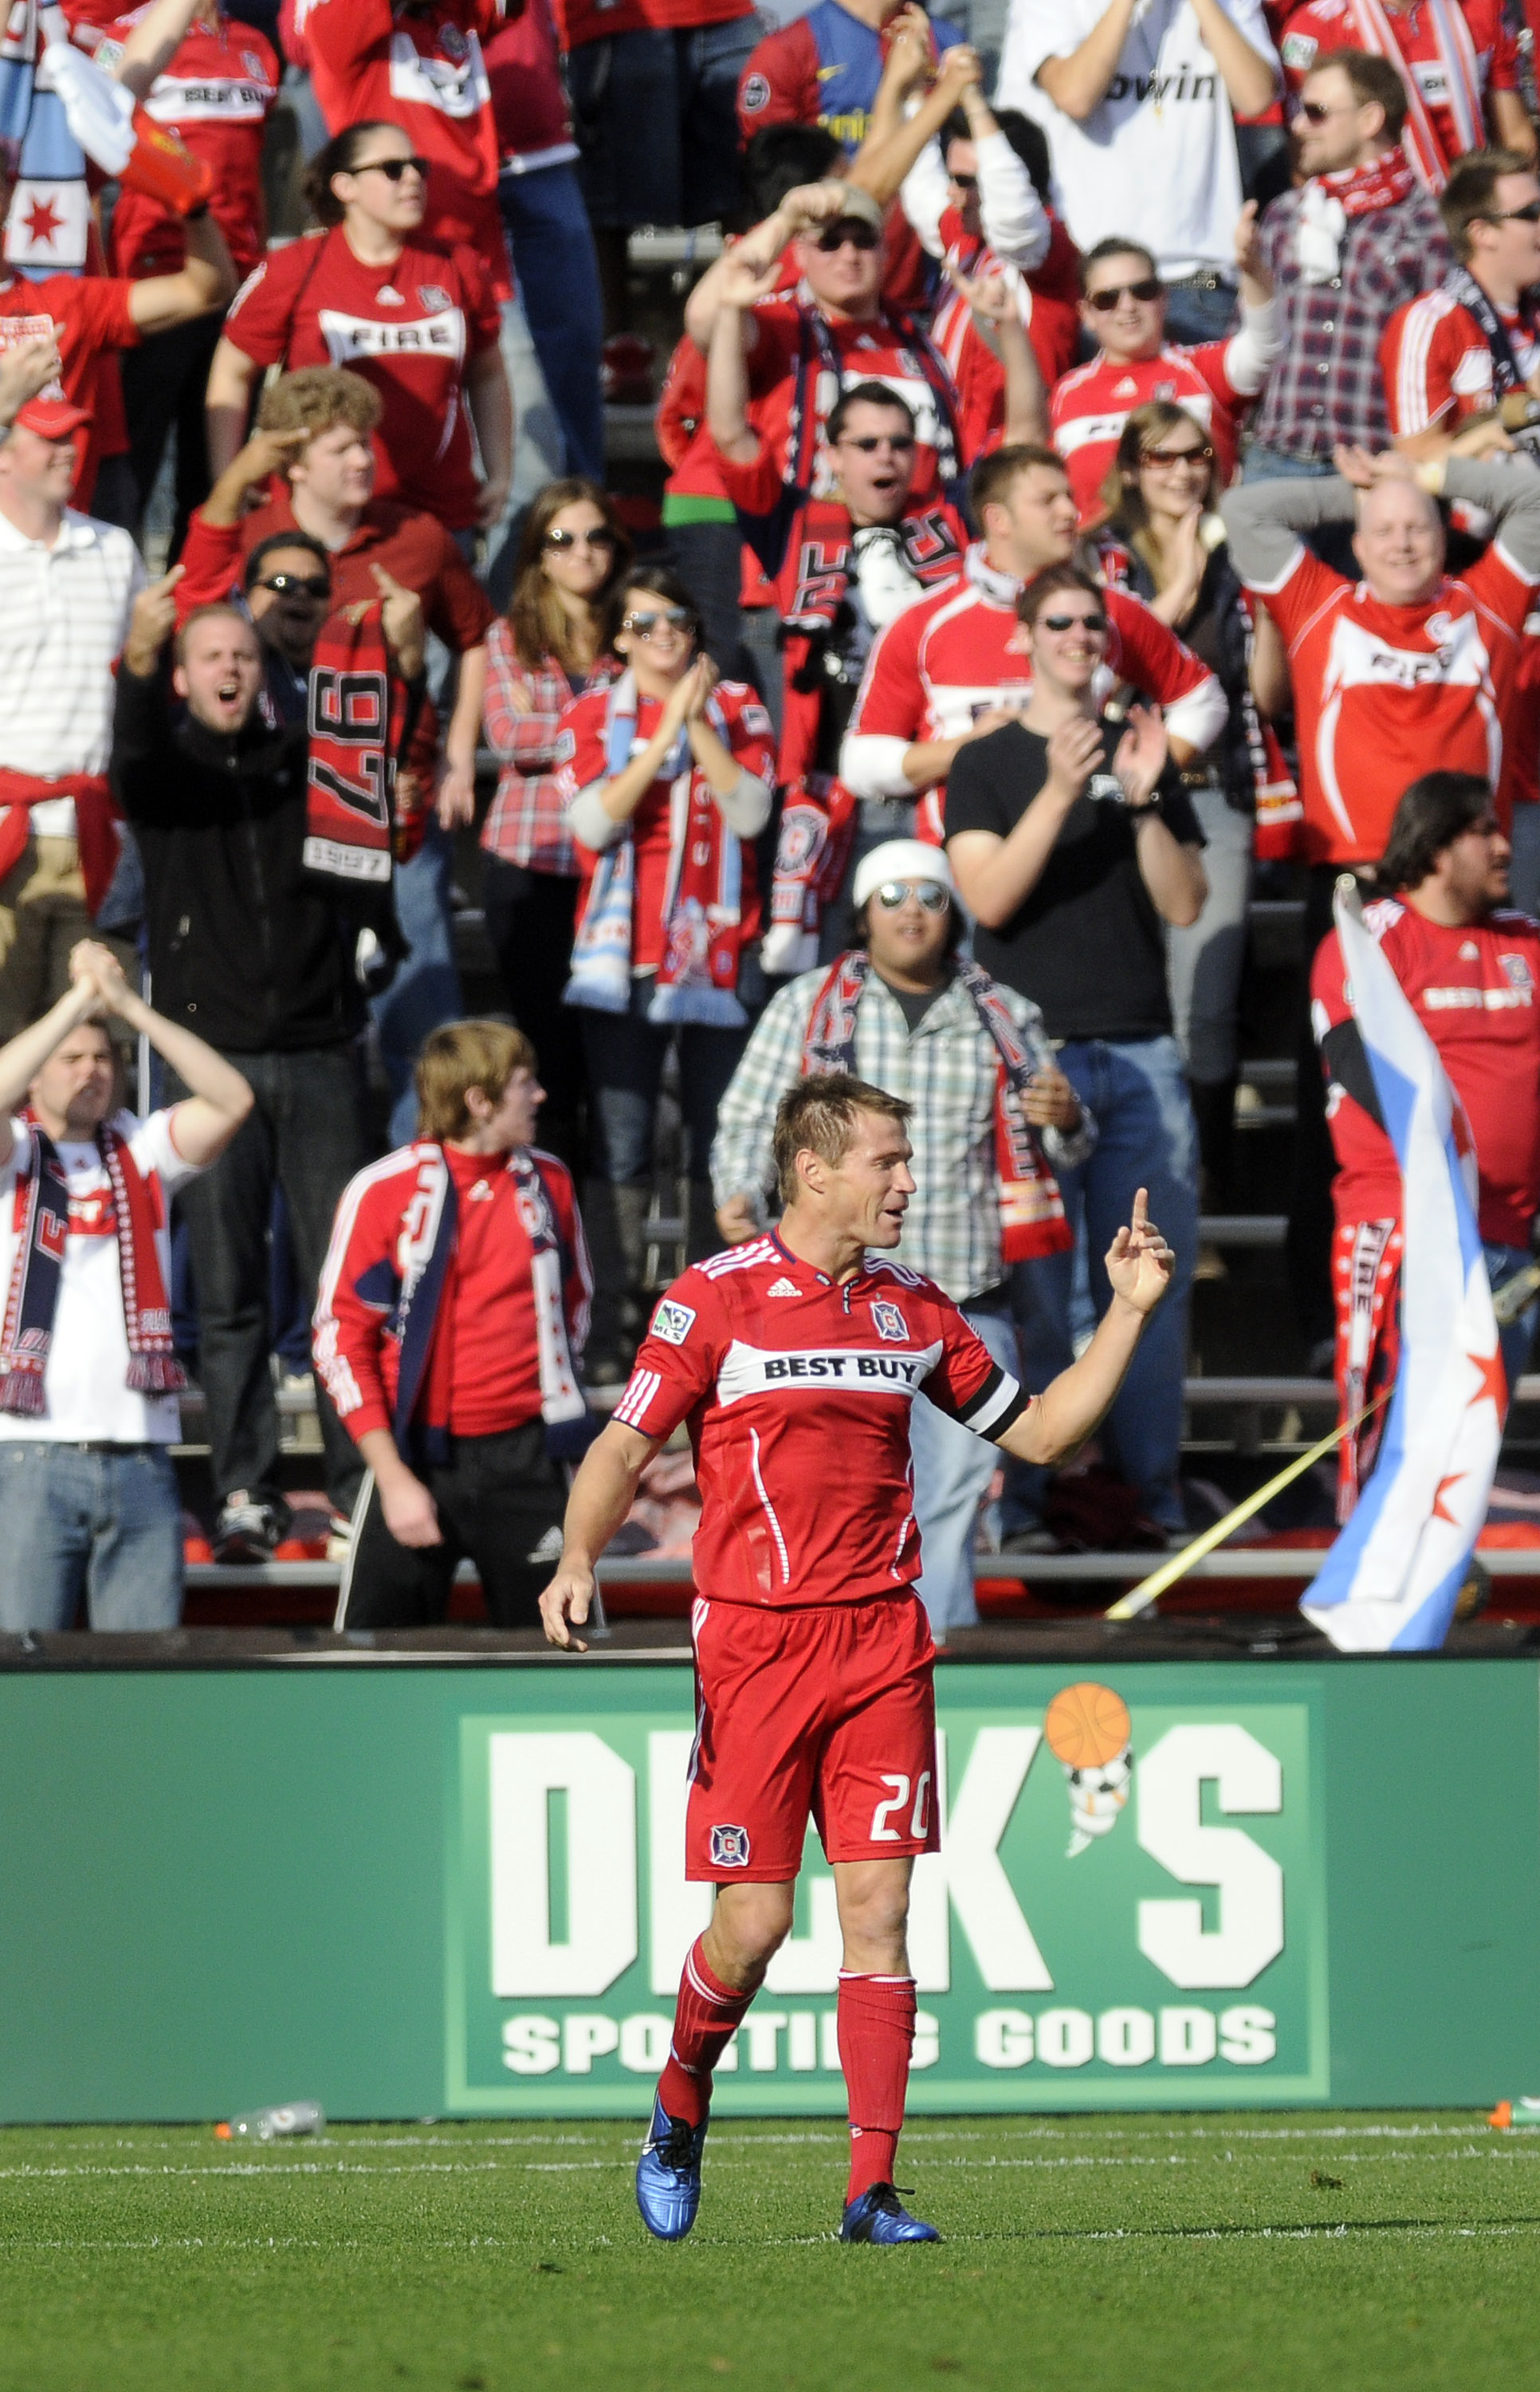 BRIDGEVIEW, IL - OCTOBER 16: Brian McBride #20 of the Chicago Fire reacts to an offside call playing his last game against  D.C. United in an MLS match on October 16, 2010 at Toyota Park in Bridgeview, Illinois. The match ended in a 0-0 draw. (Photo by Da